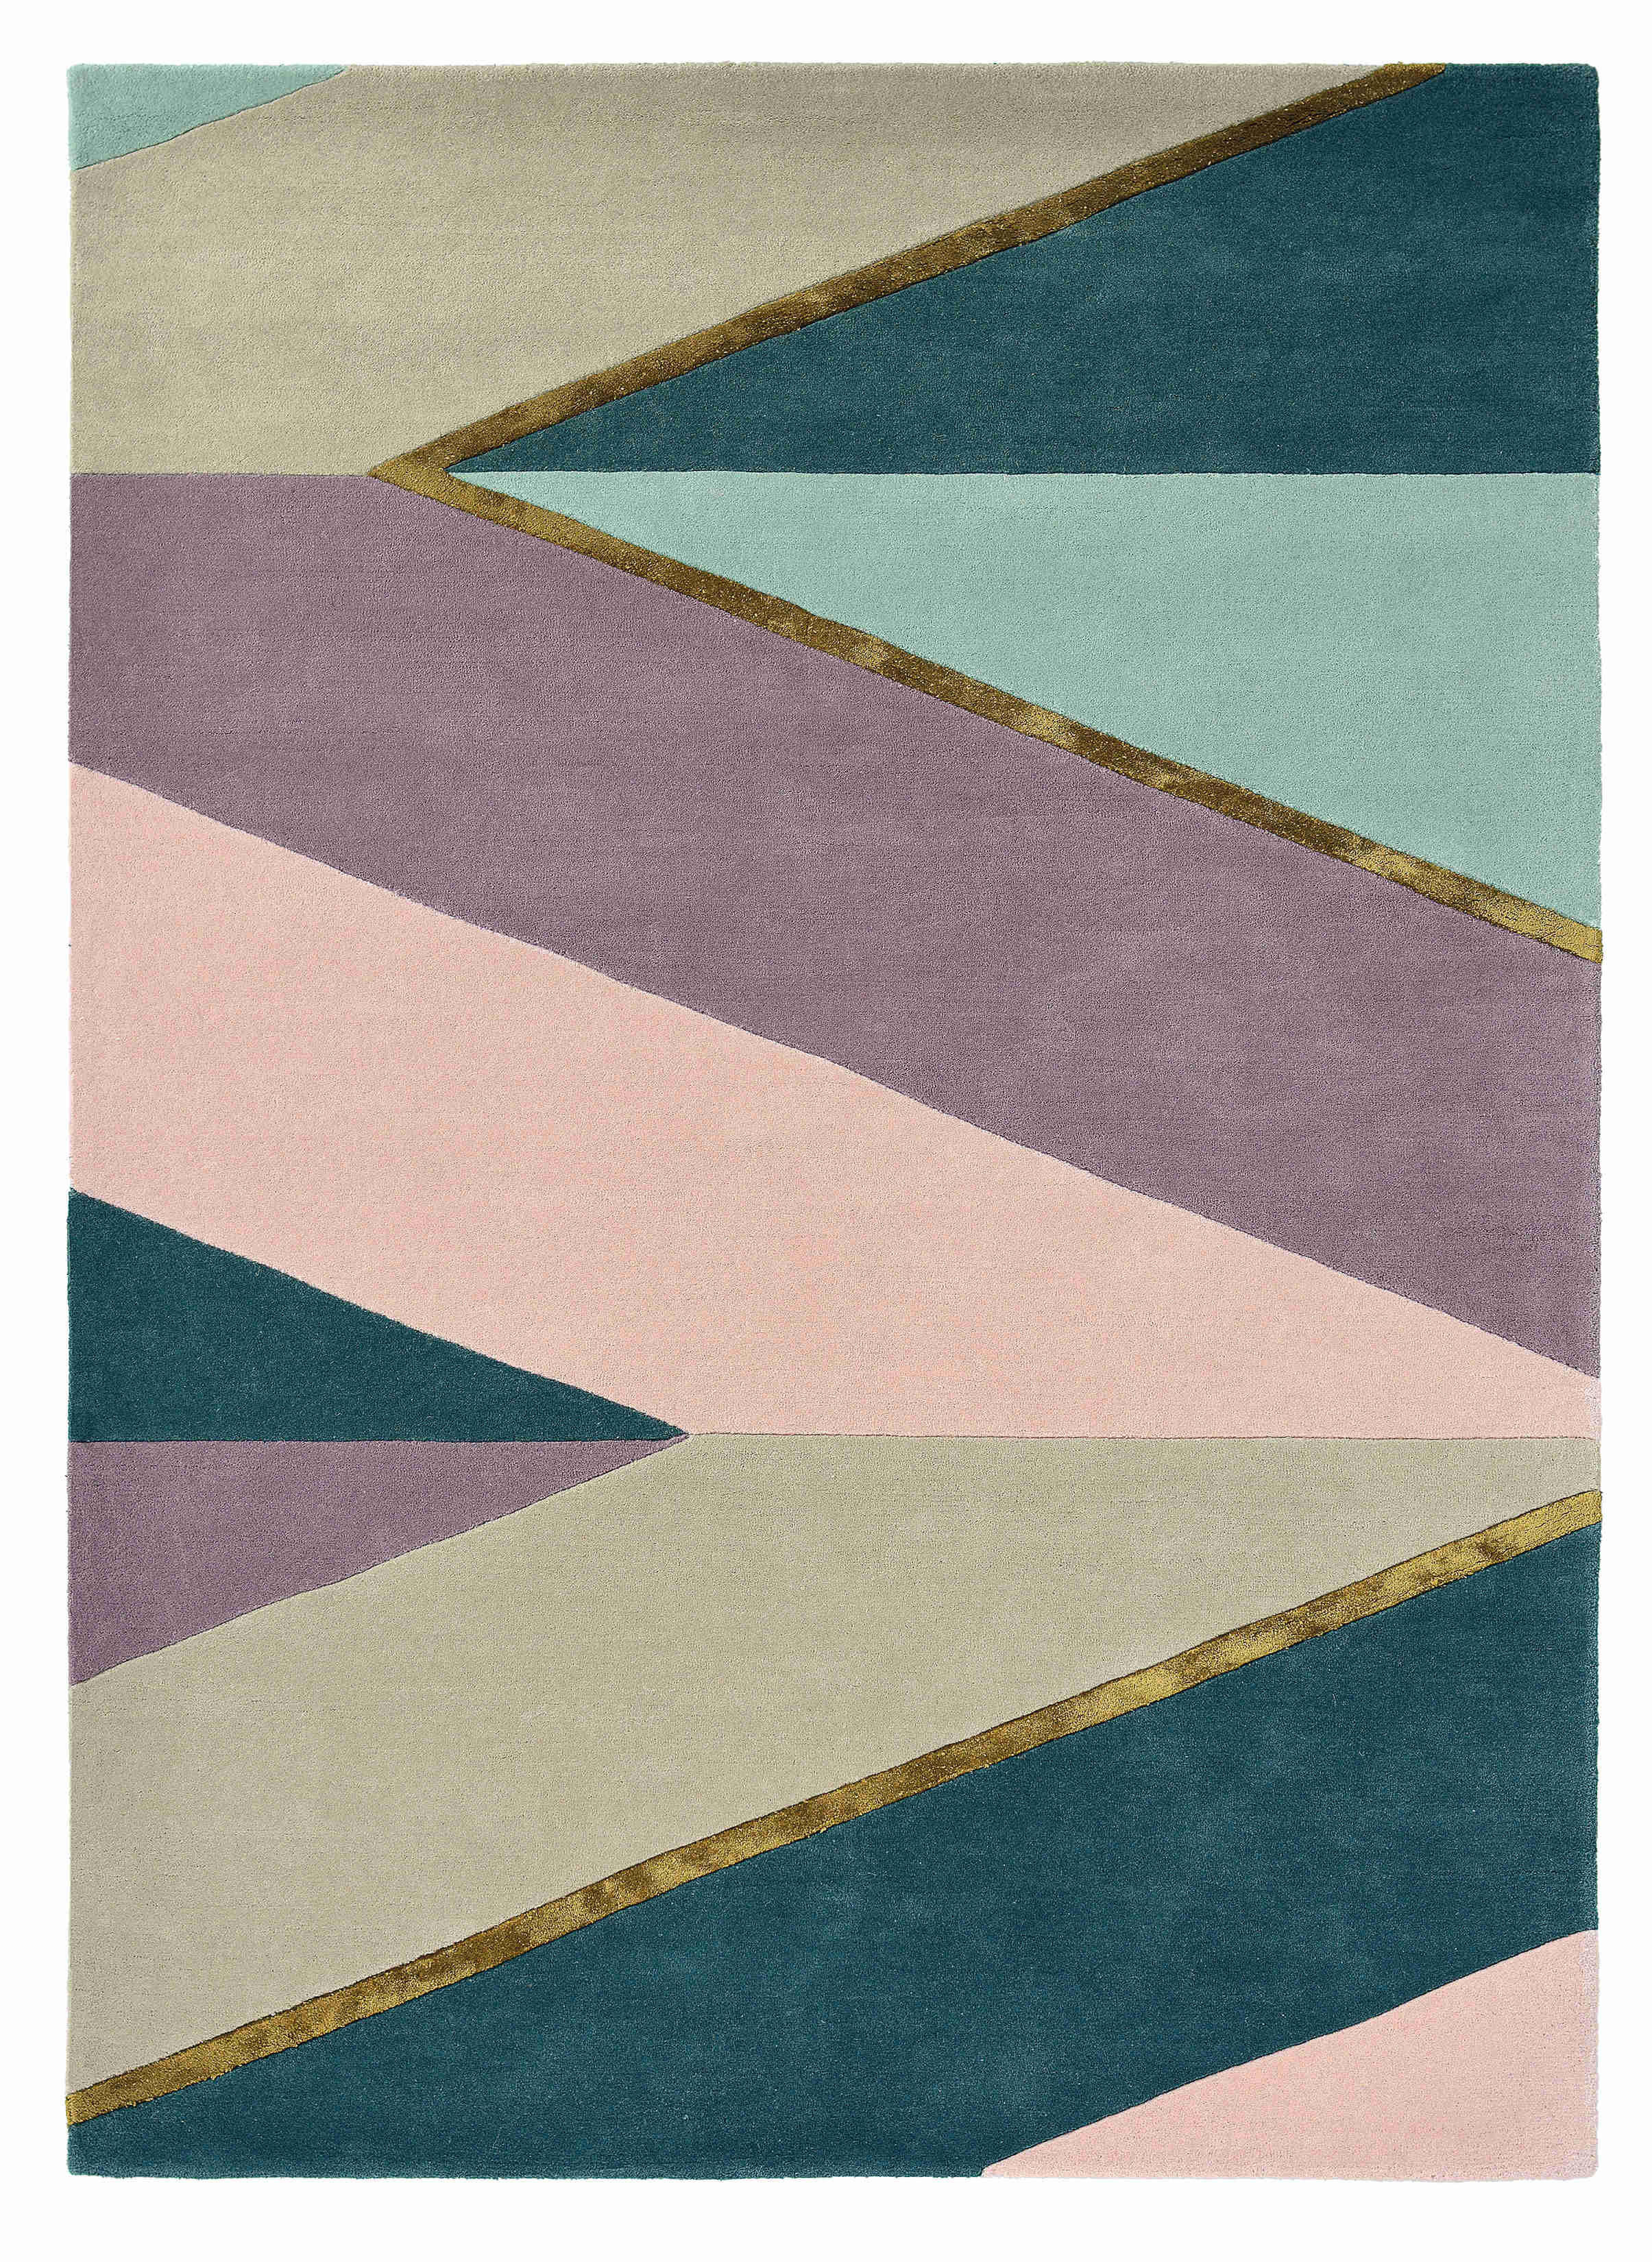 Modern rug with geometric stripe pattern in green, teal, grey and purple. Gold details.